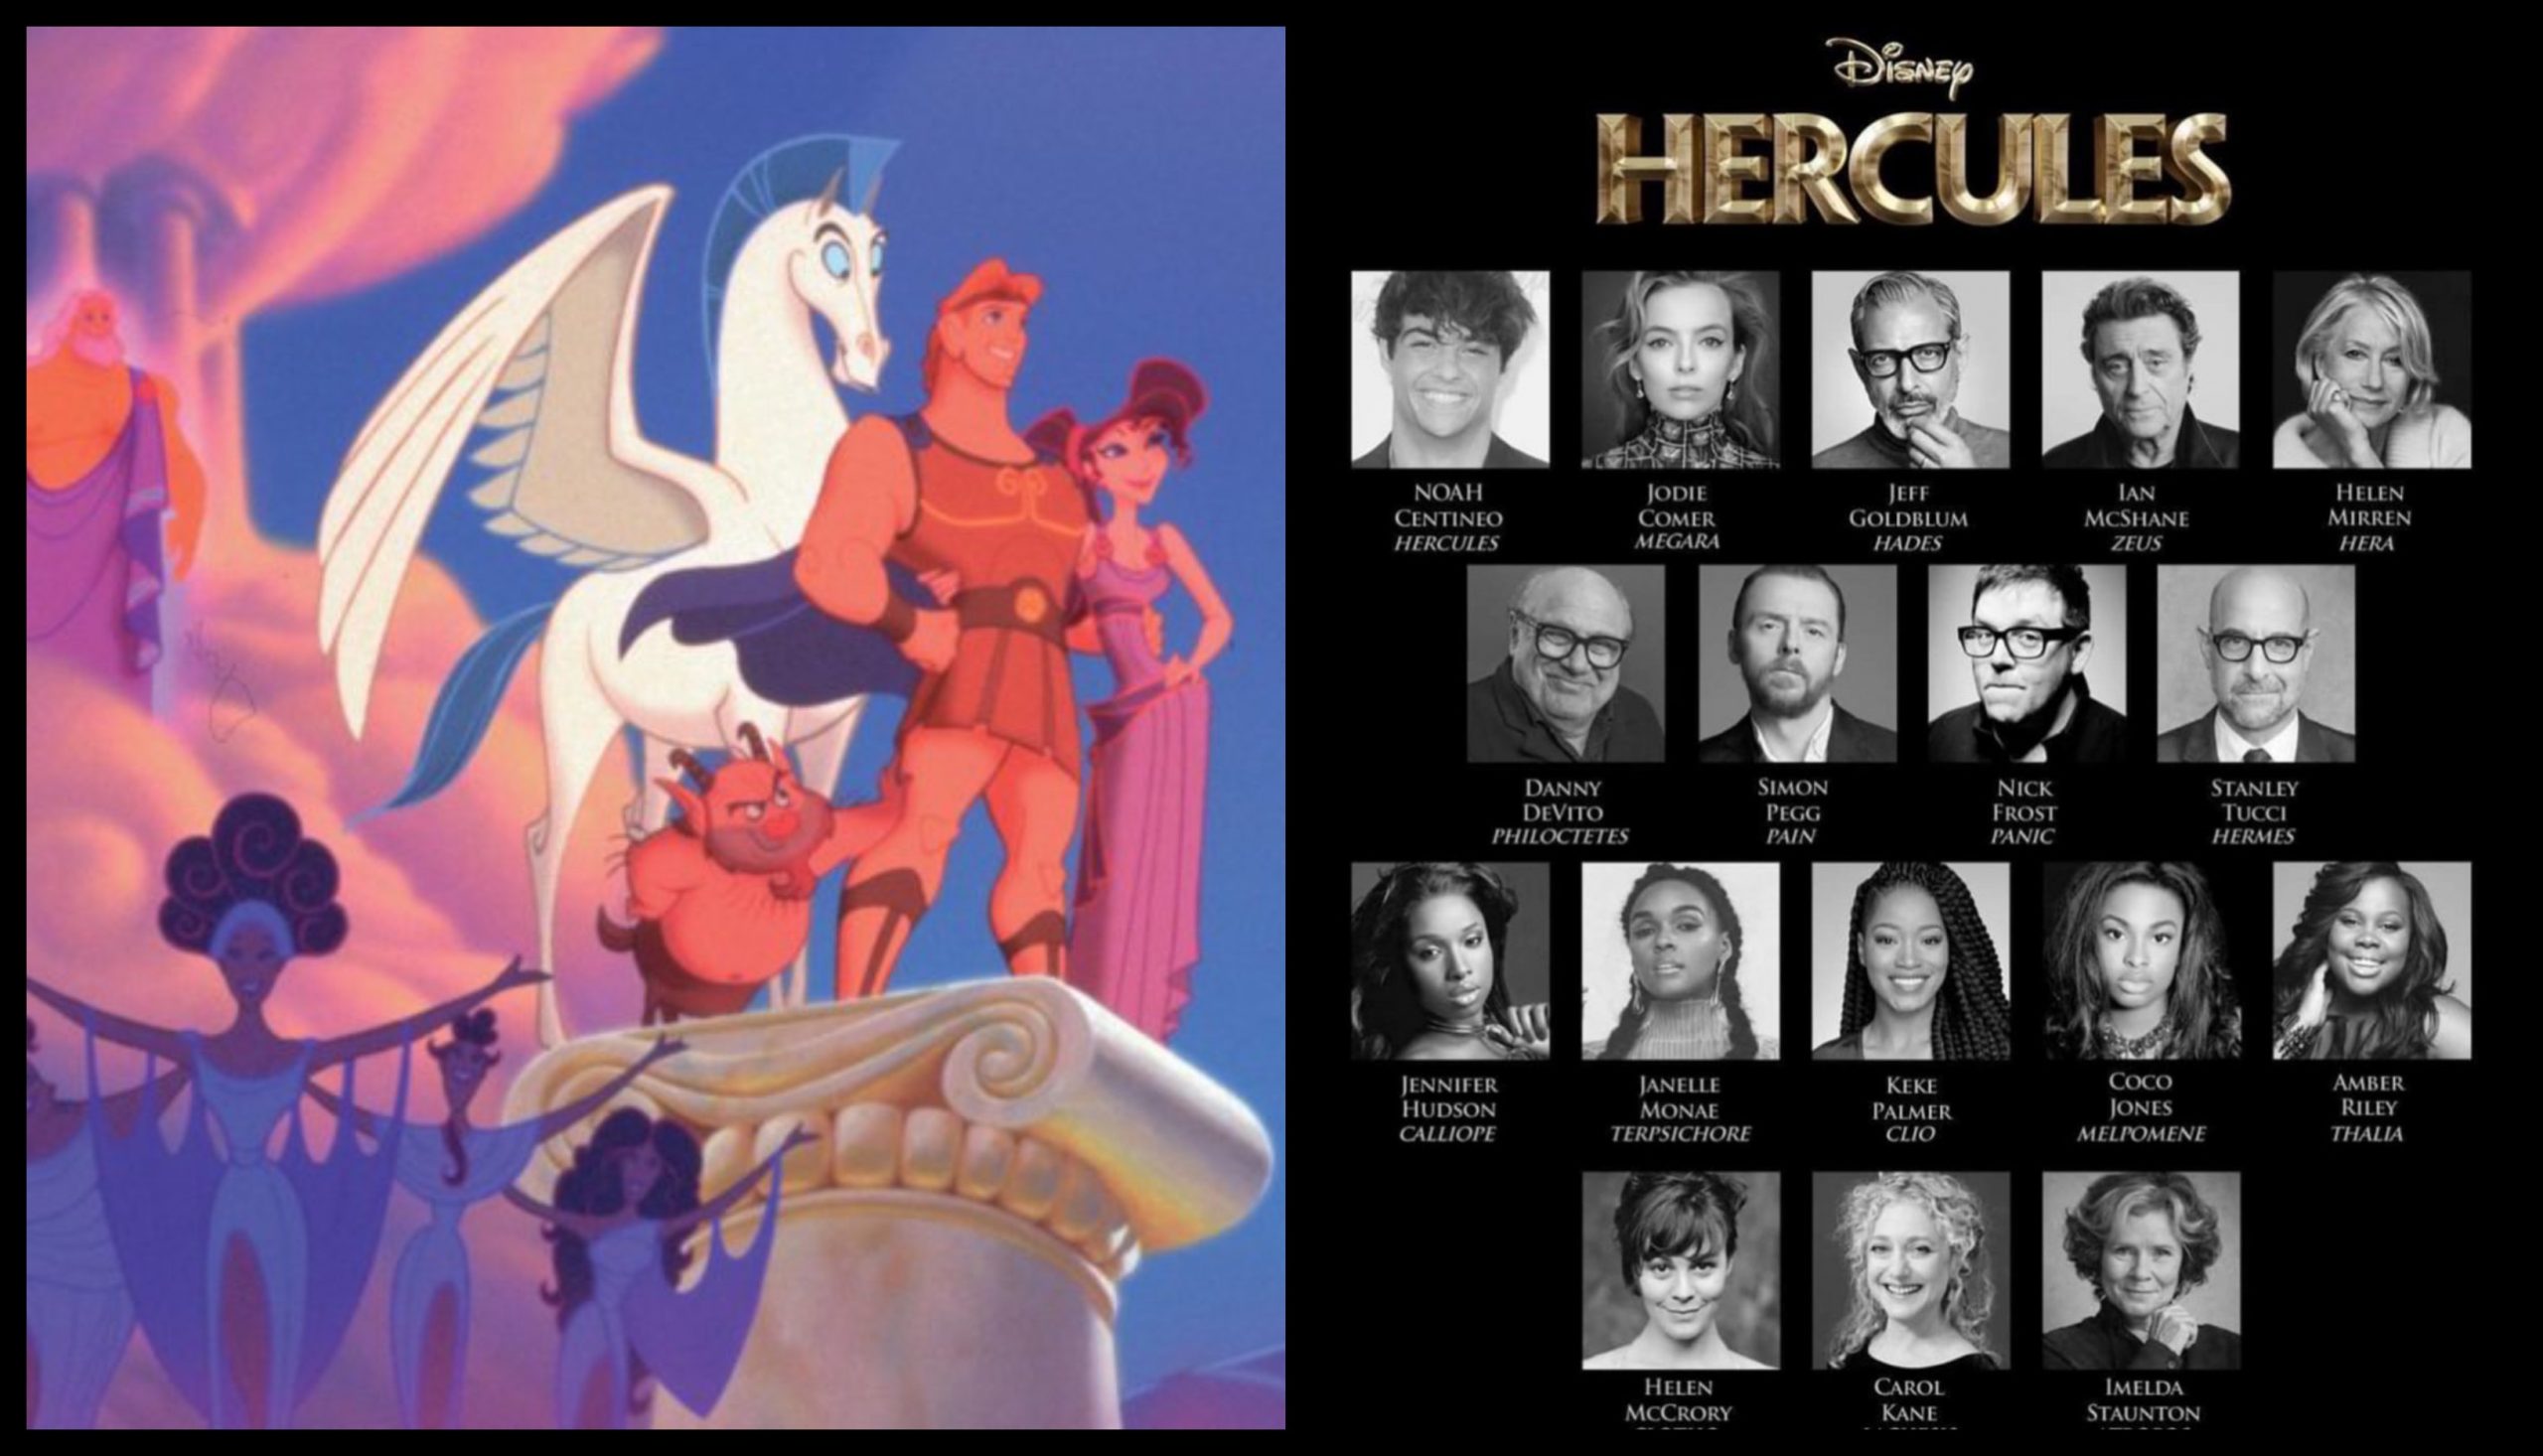 Fan Made Cast List for Disney’s Live-Action ‘Hercules’ Goes Viral